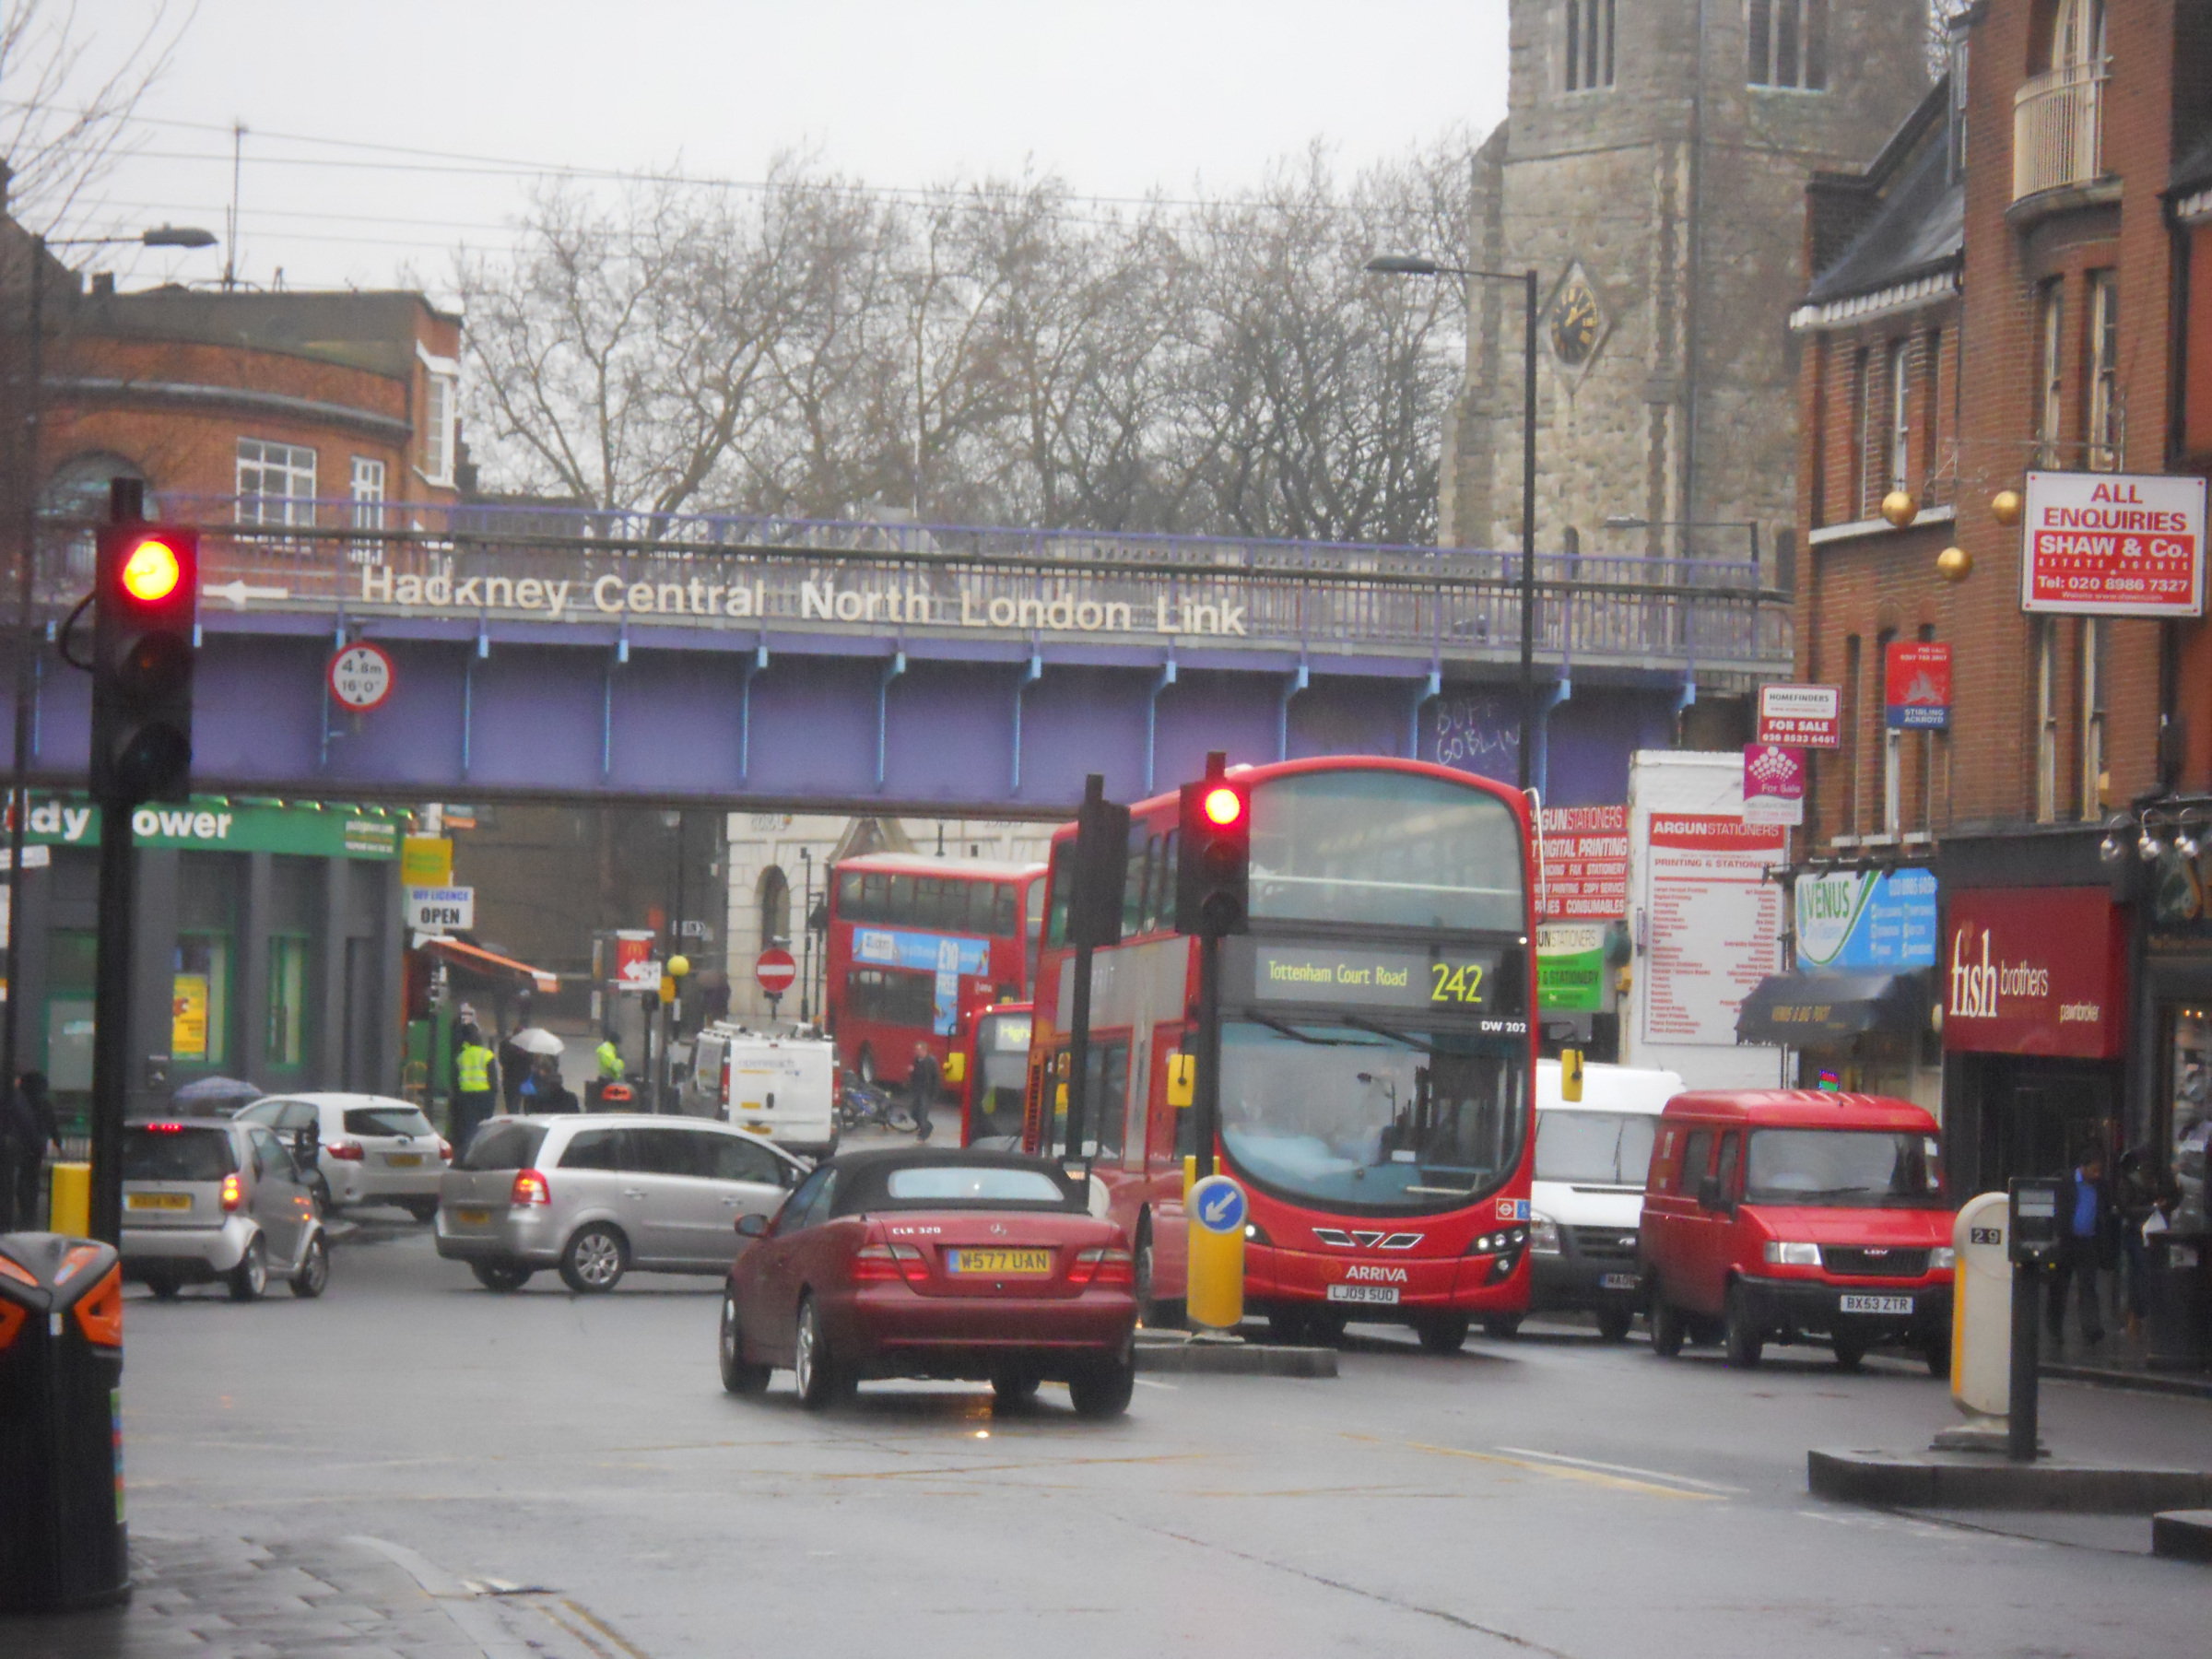 Main road in Hackney and Hackney Central station